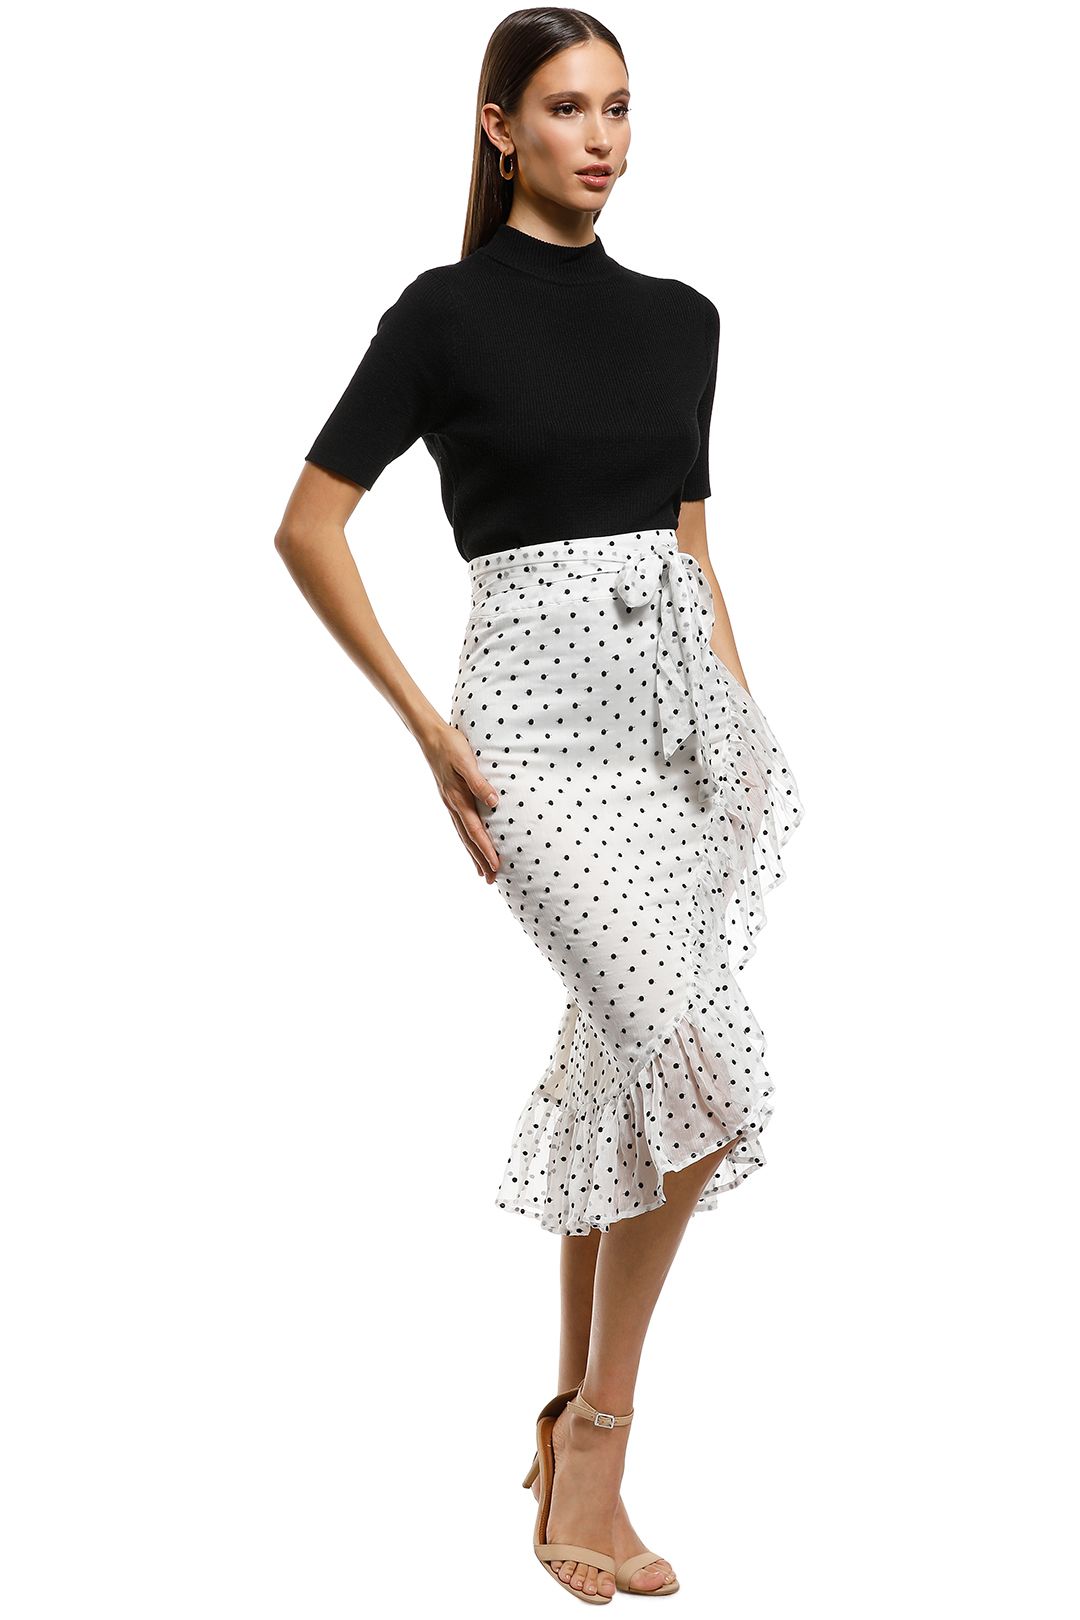 Ministry of Style - Illusion Skirt - Ivory - Side